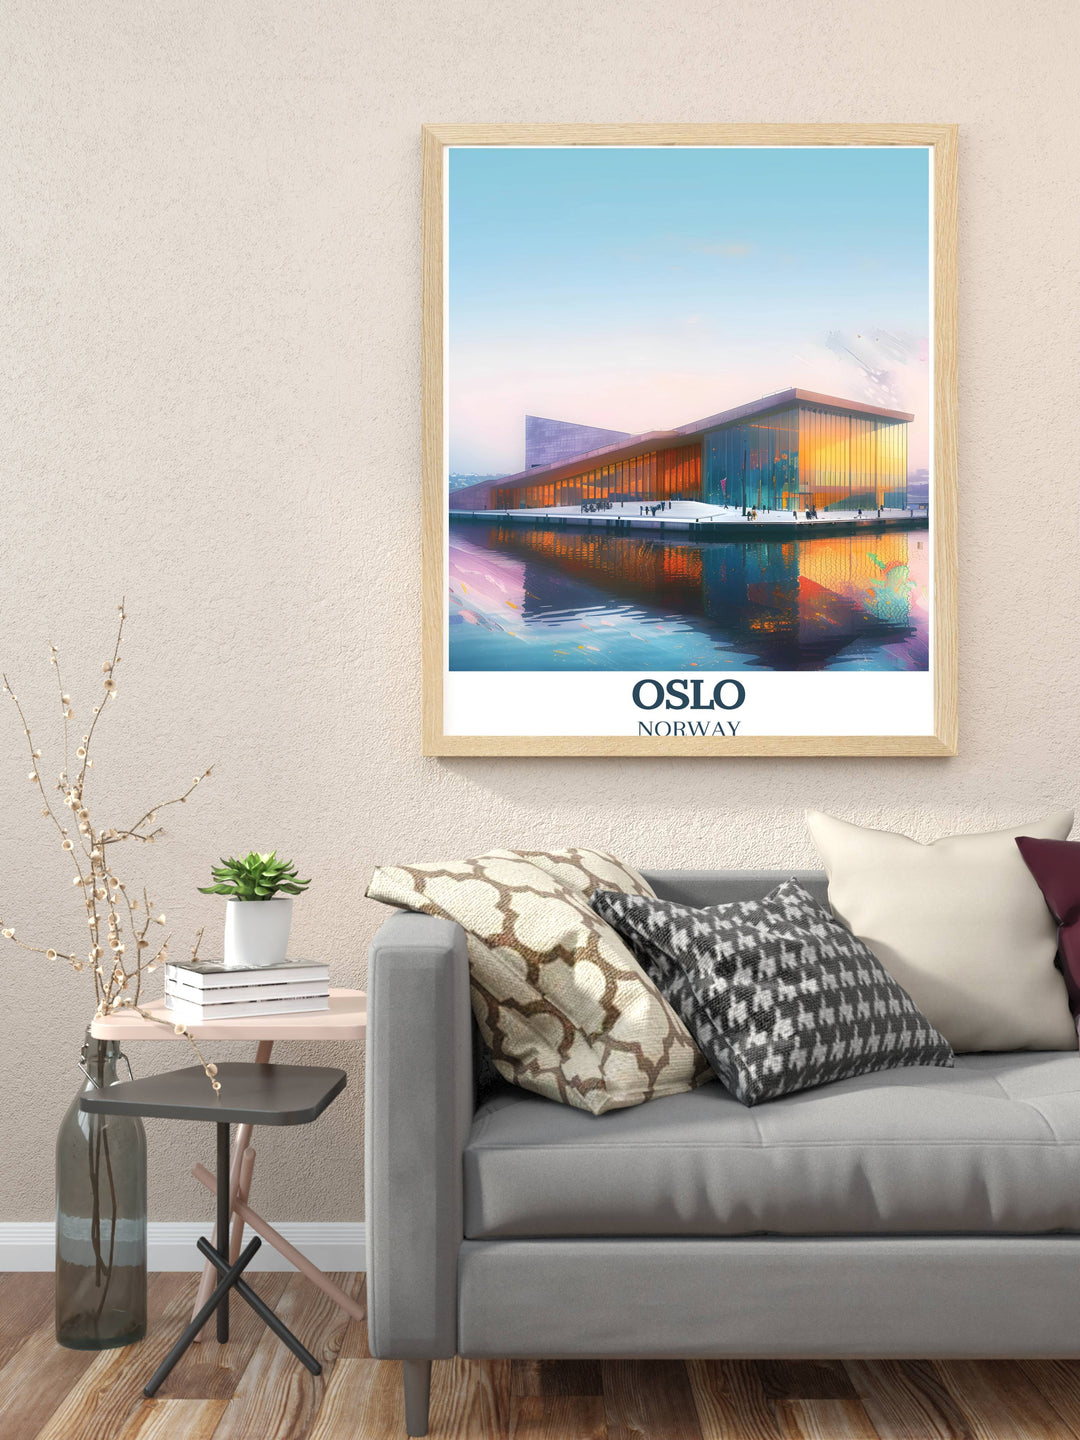 Custom print of Norway, allowing you to personalize your space with your favorite scenes and memories from this Scandinavian paradise.